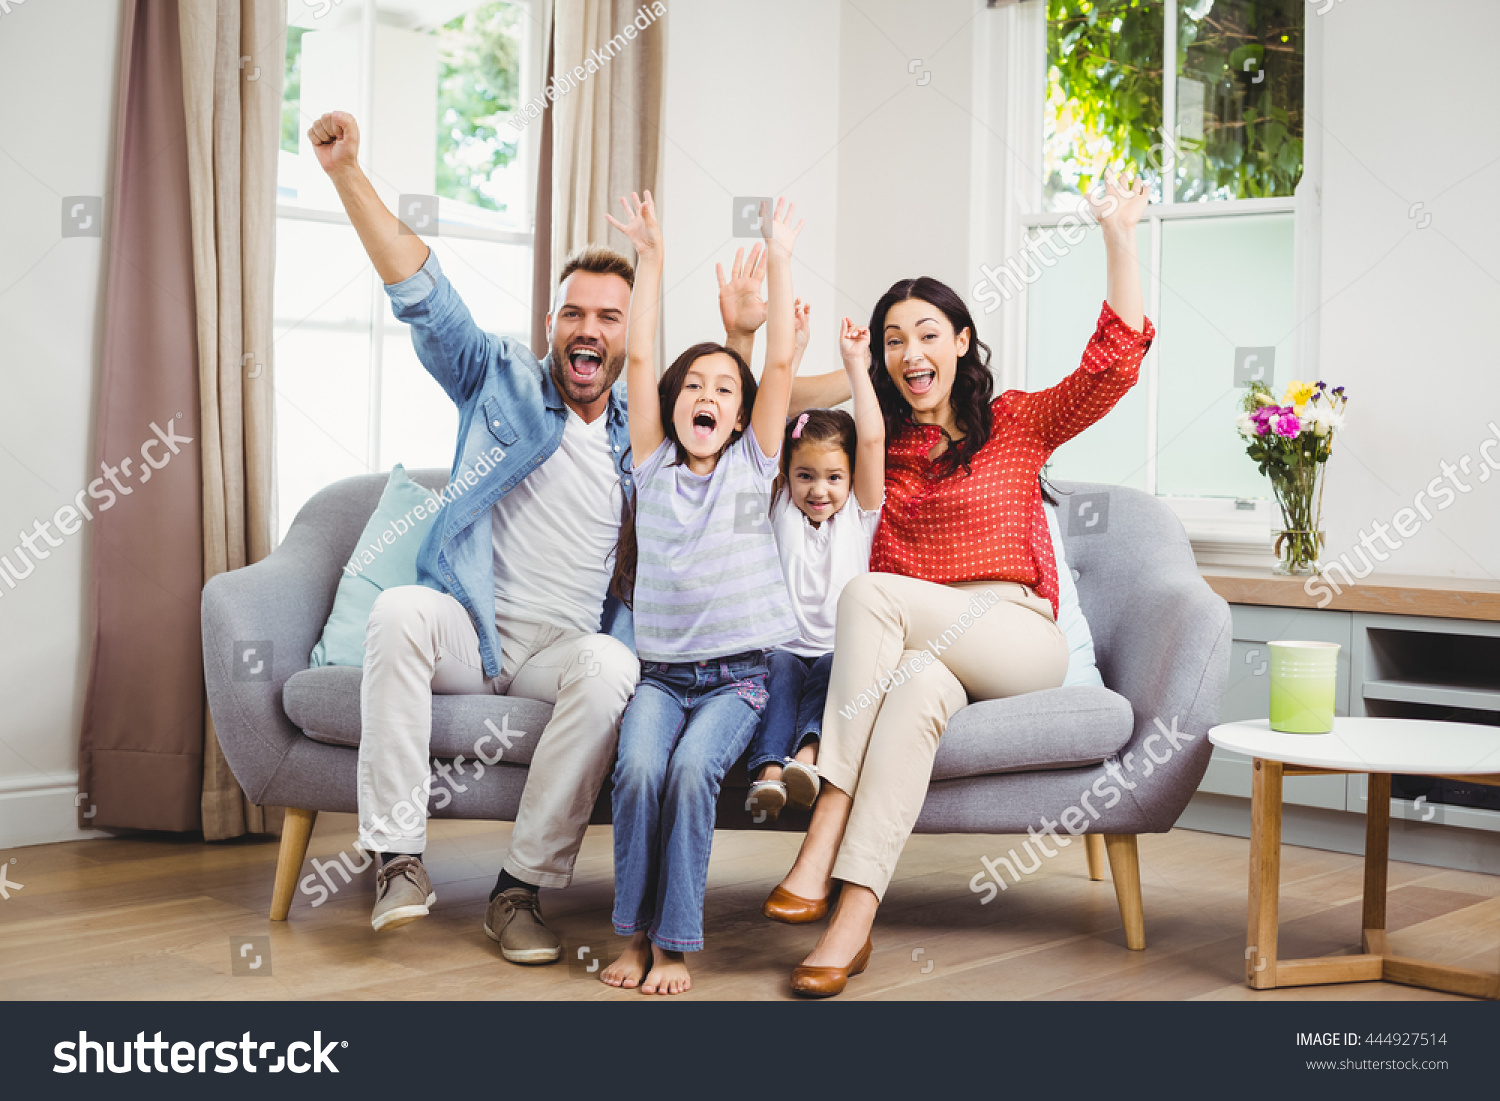 Full length of happy family cheering while siting on sofa at home #444927514